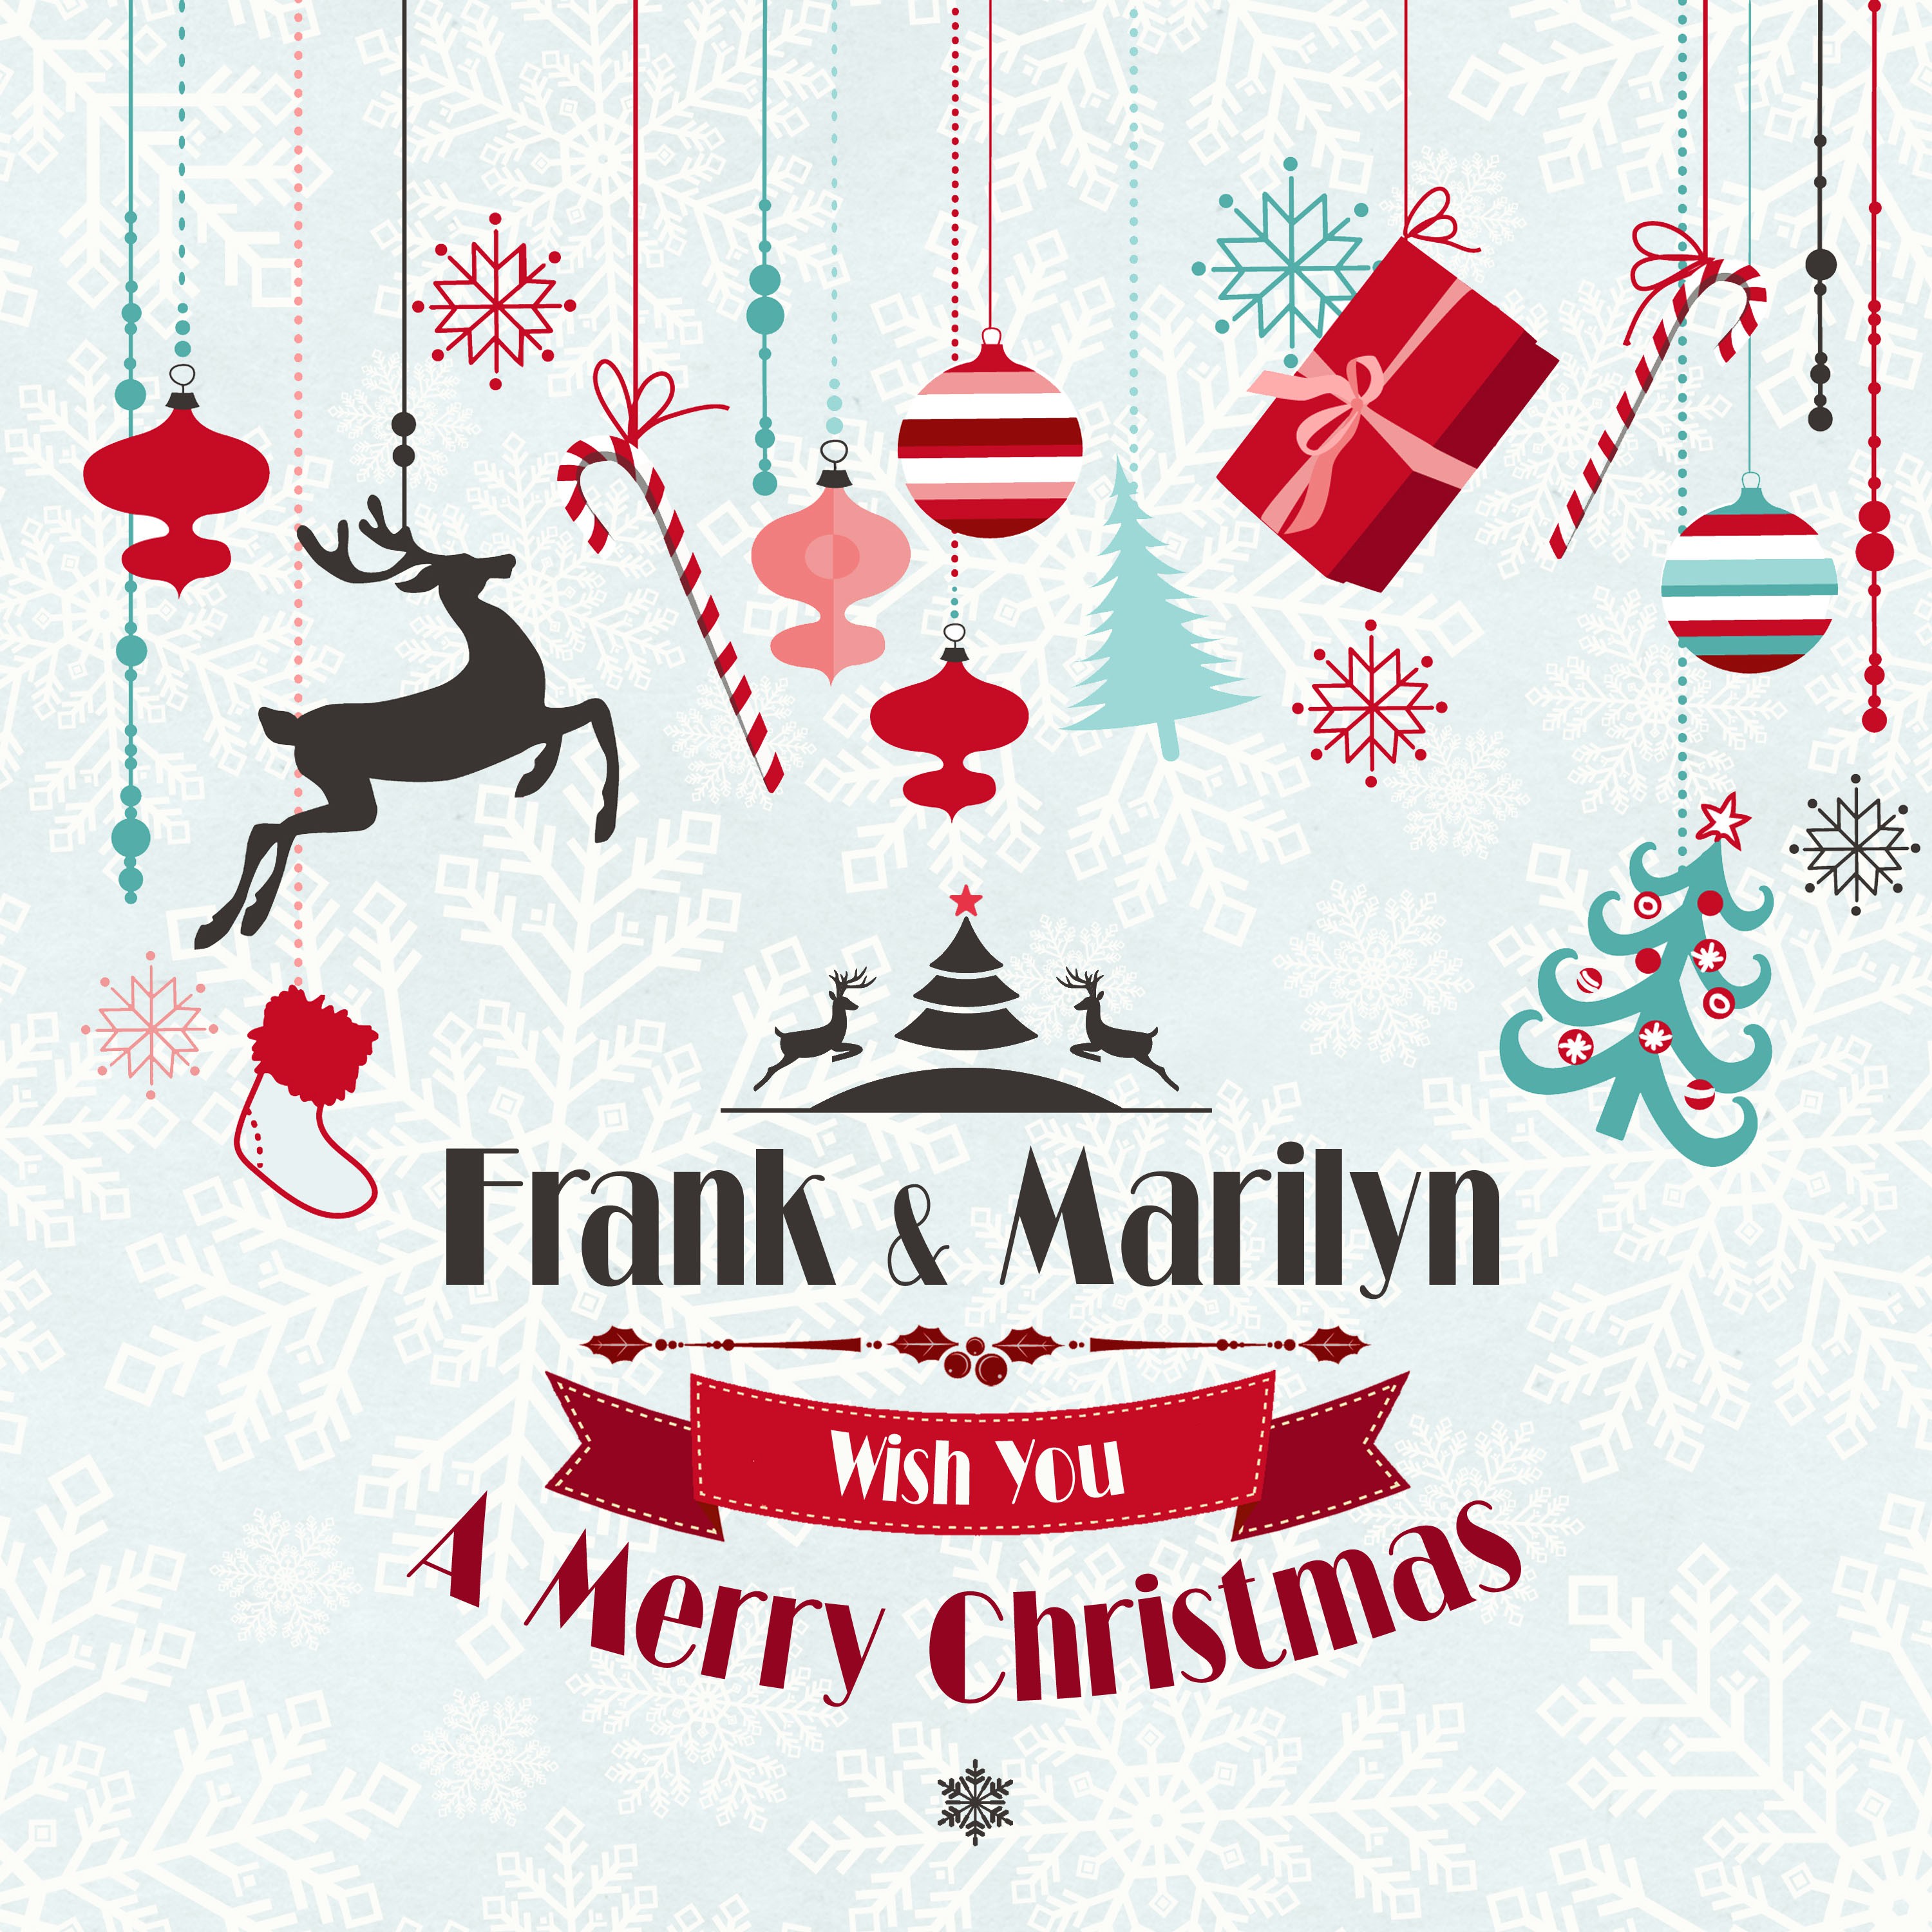 Frank & Marilyn Wish You a Merry Christmas